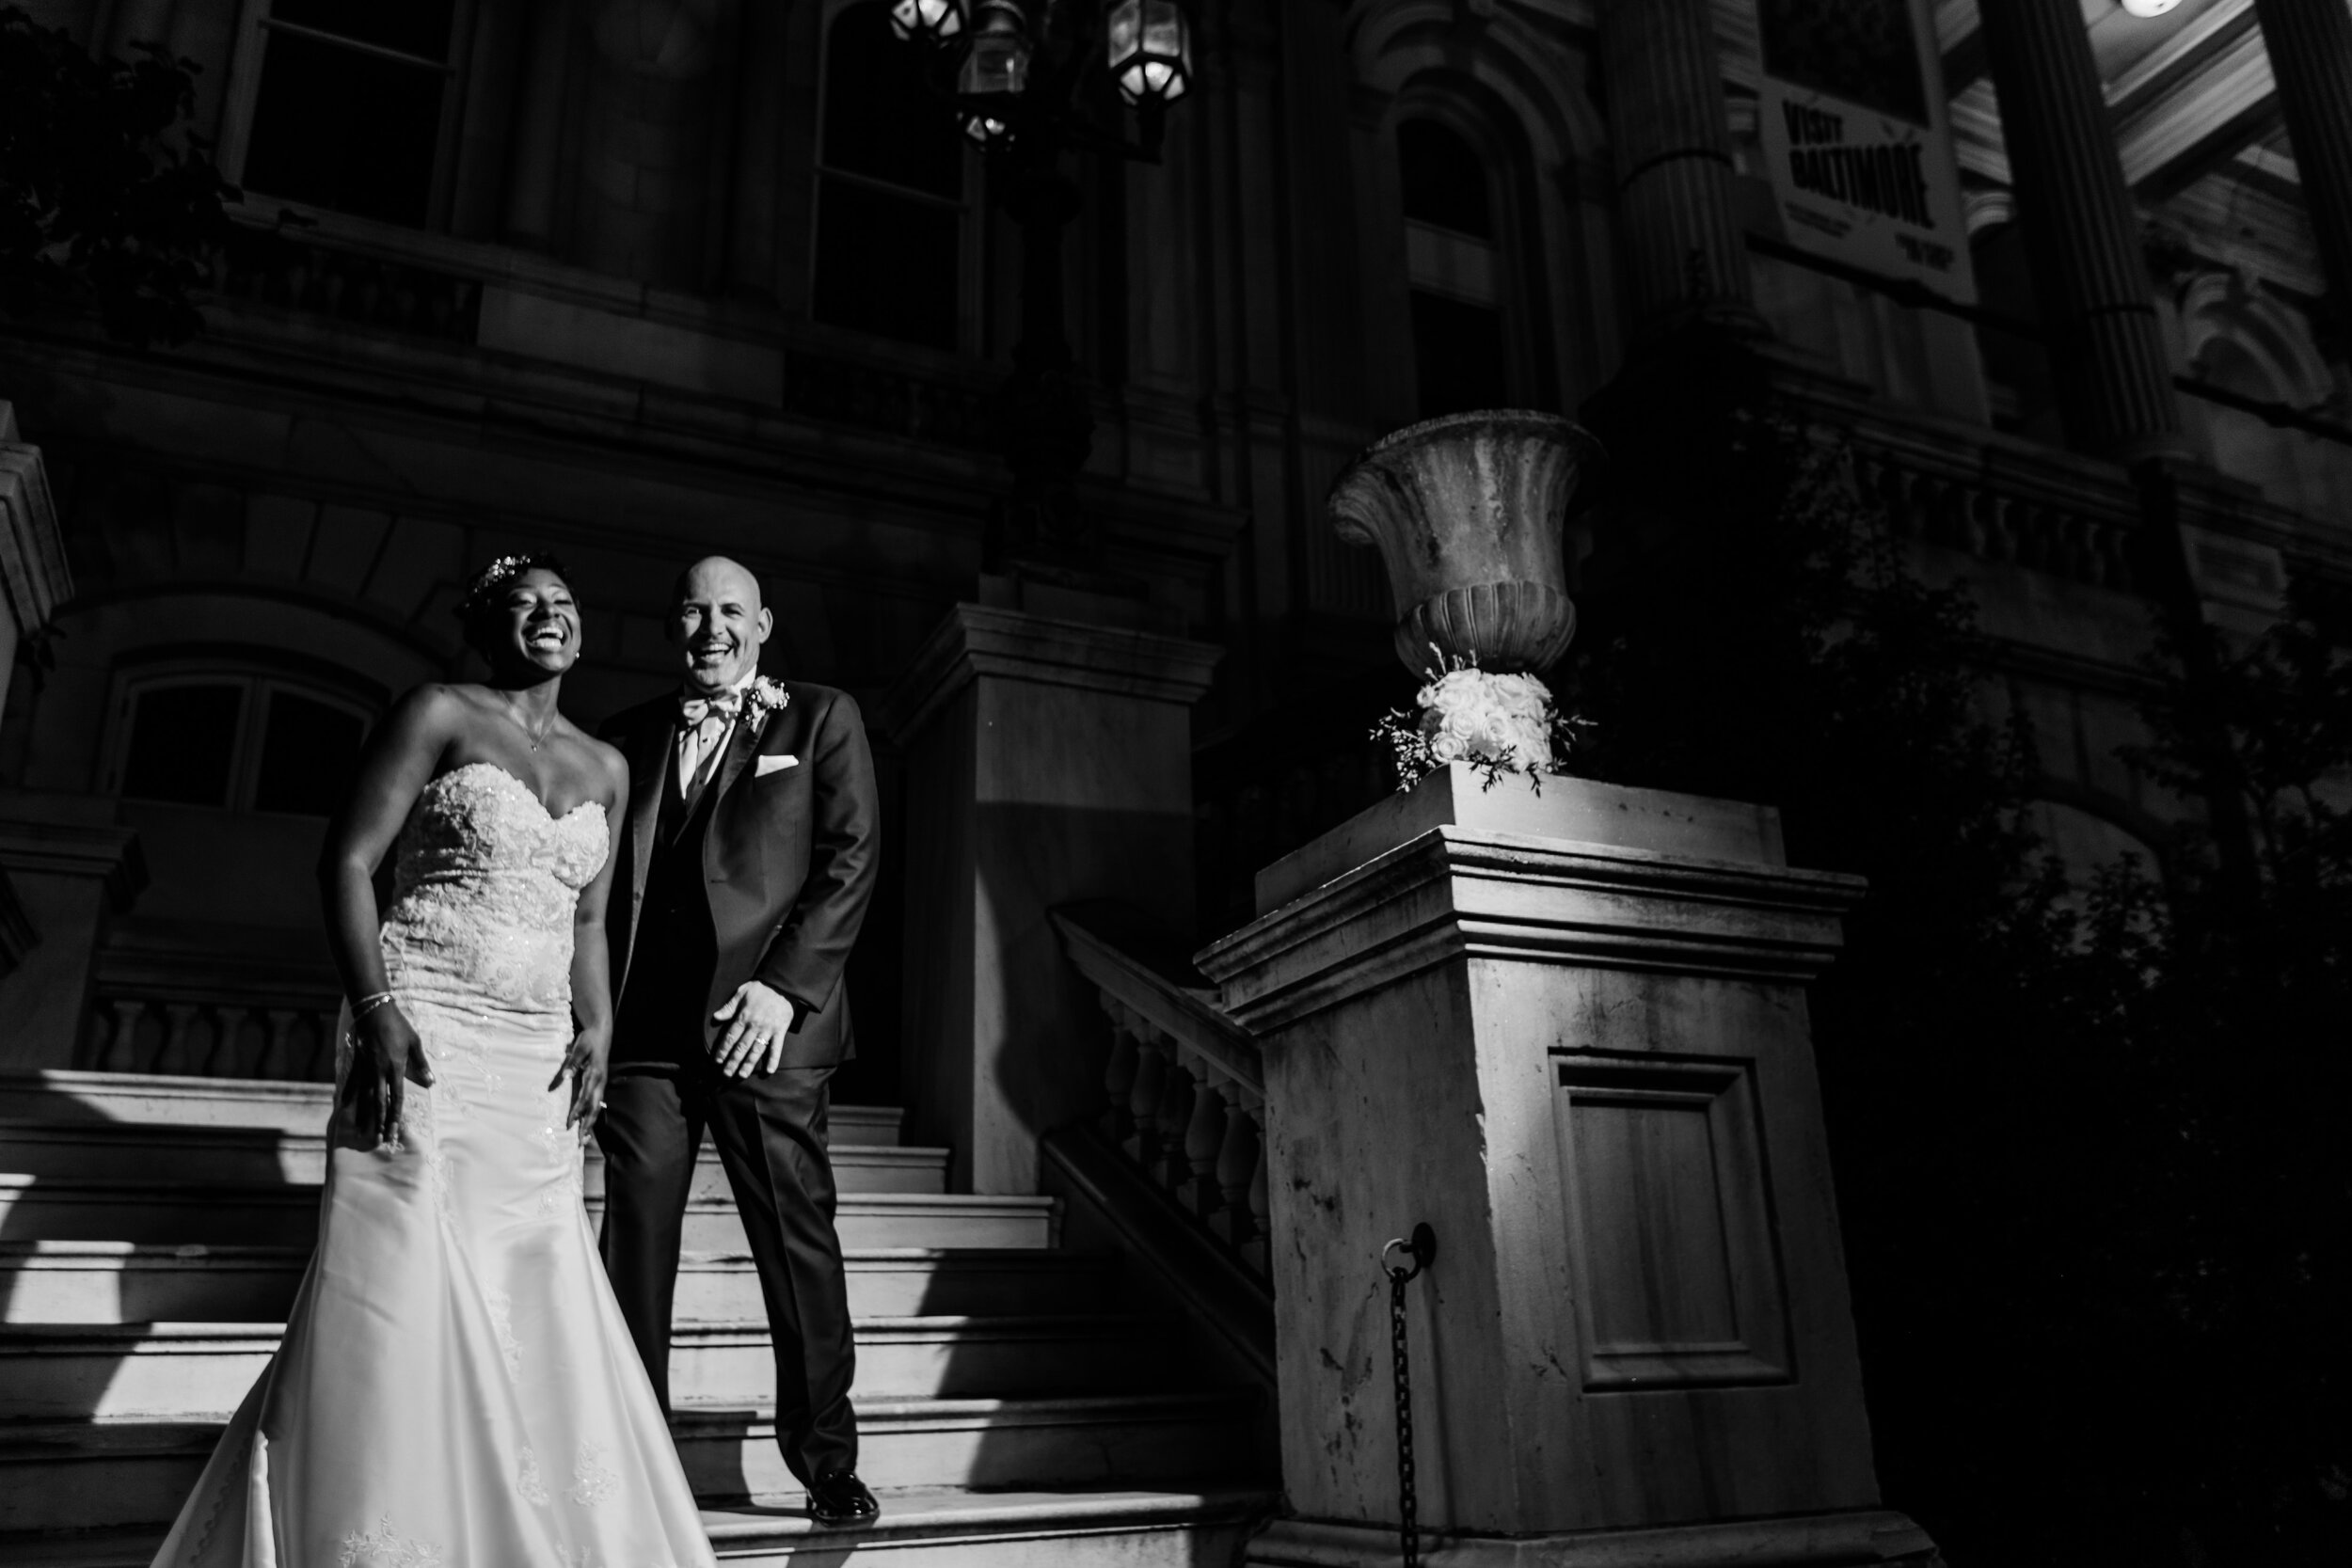 get married in baltimore city hall shot by megapixels media biracial couple wedding photographers maryland-94.jpg